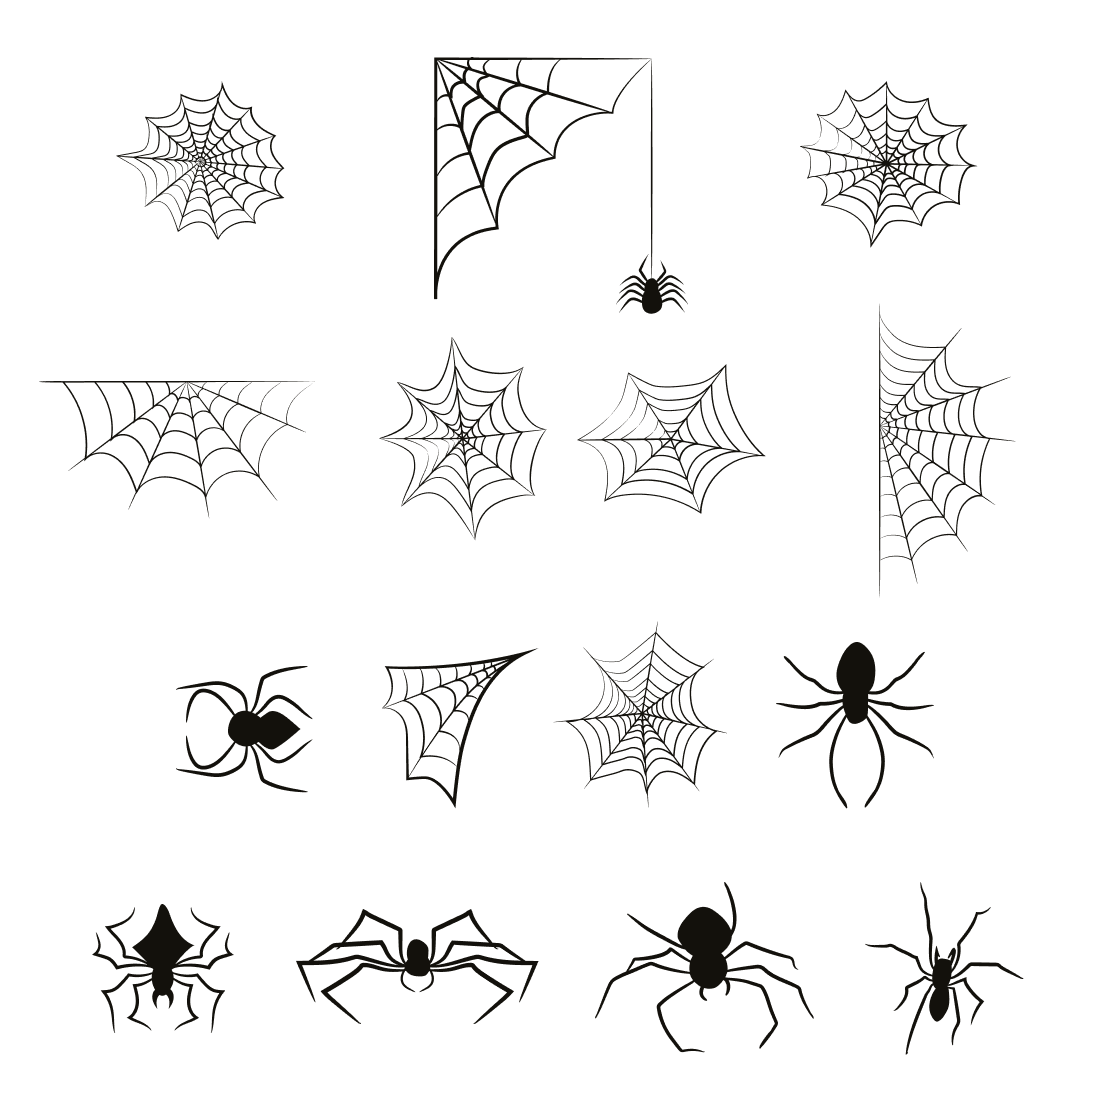 Collection of spider web designs.